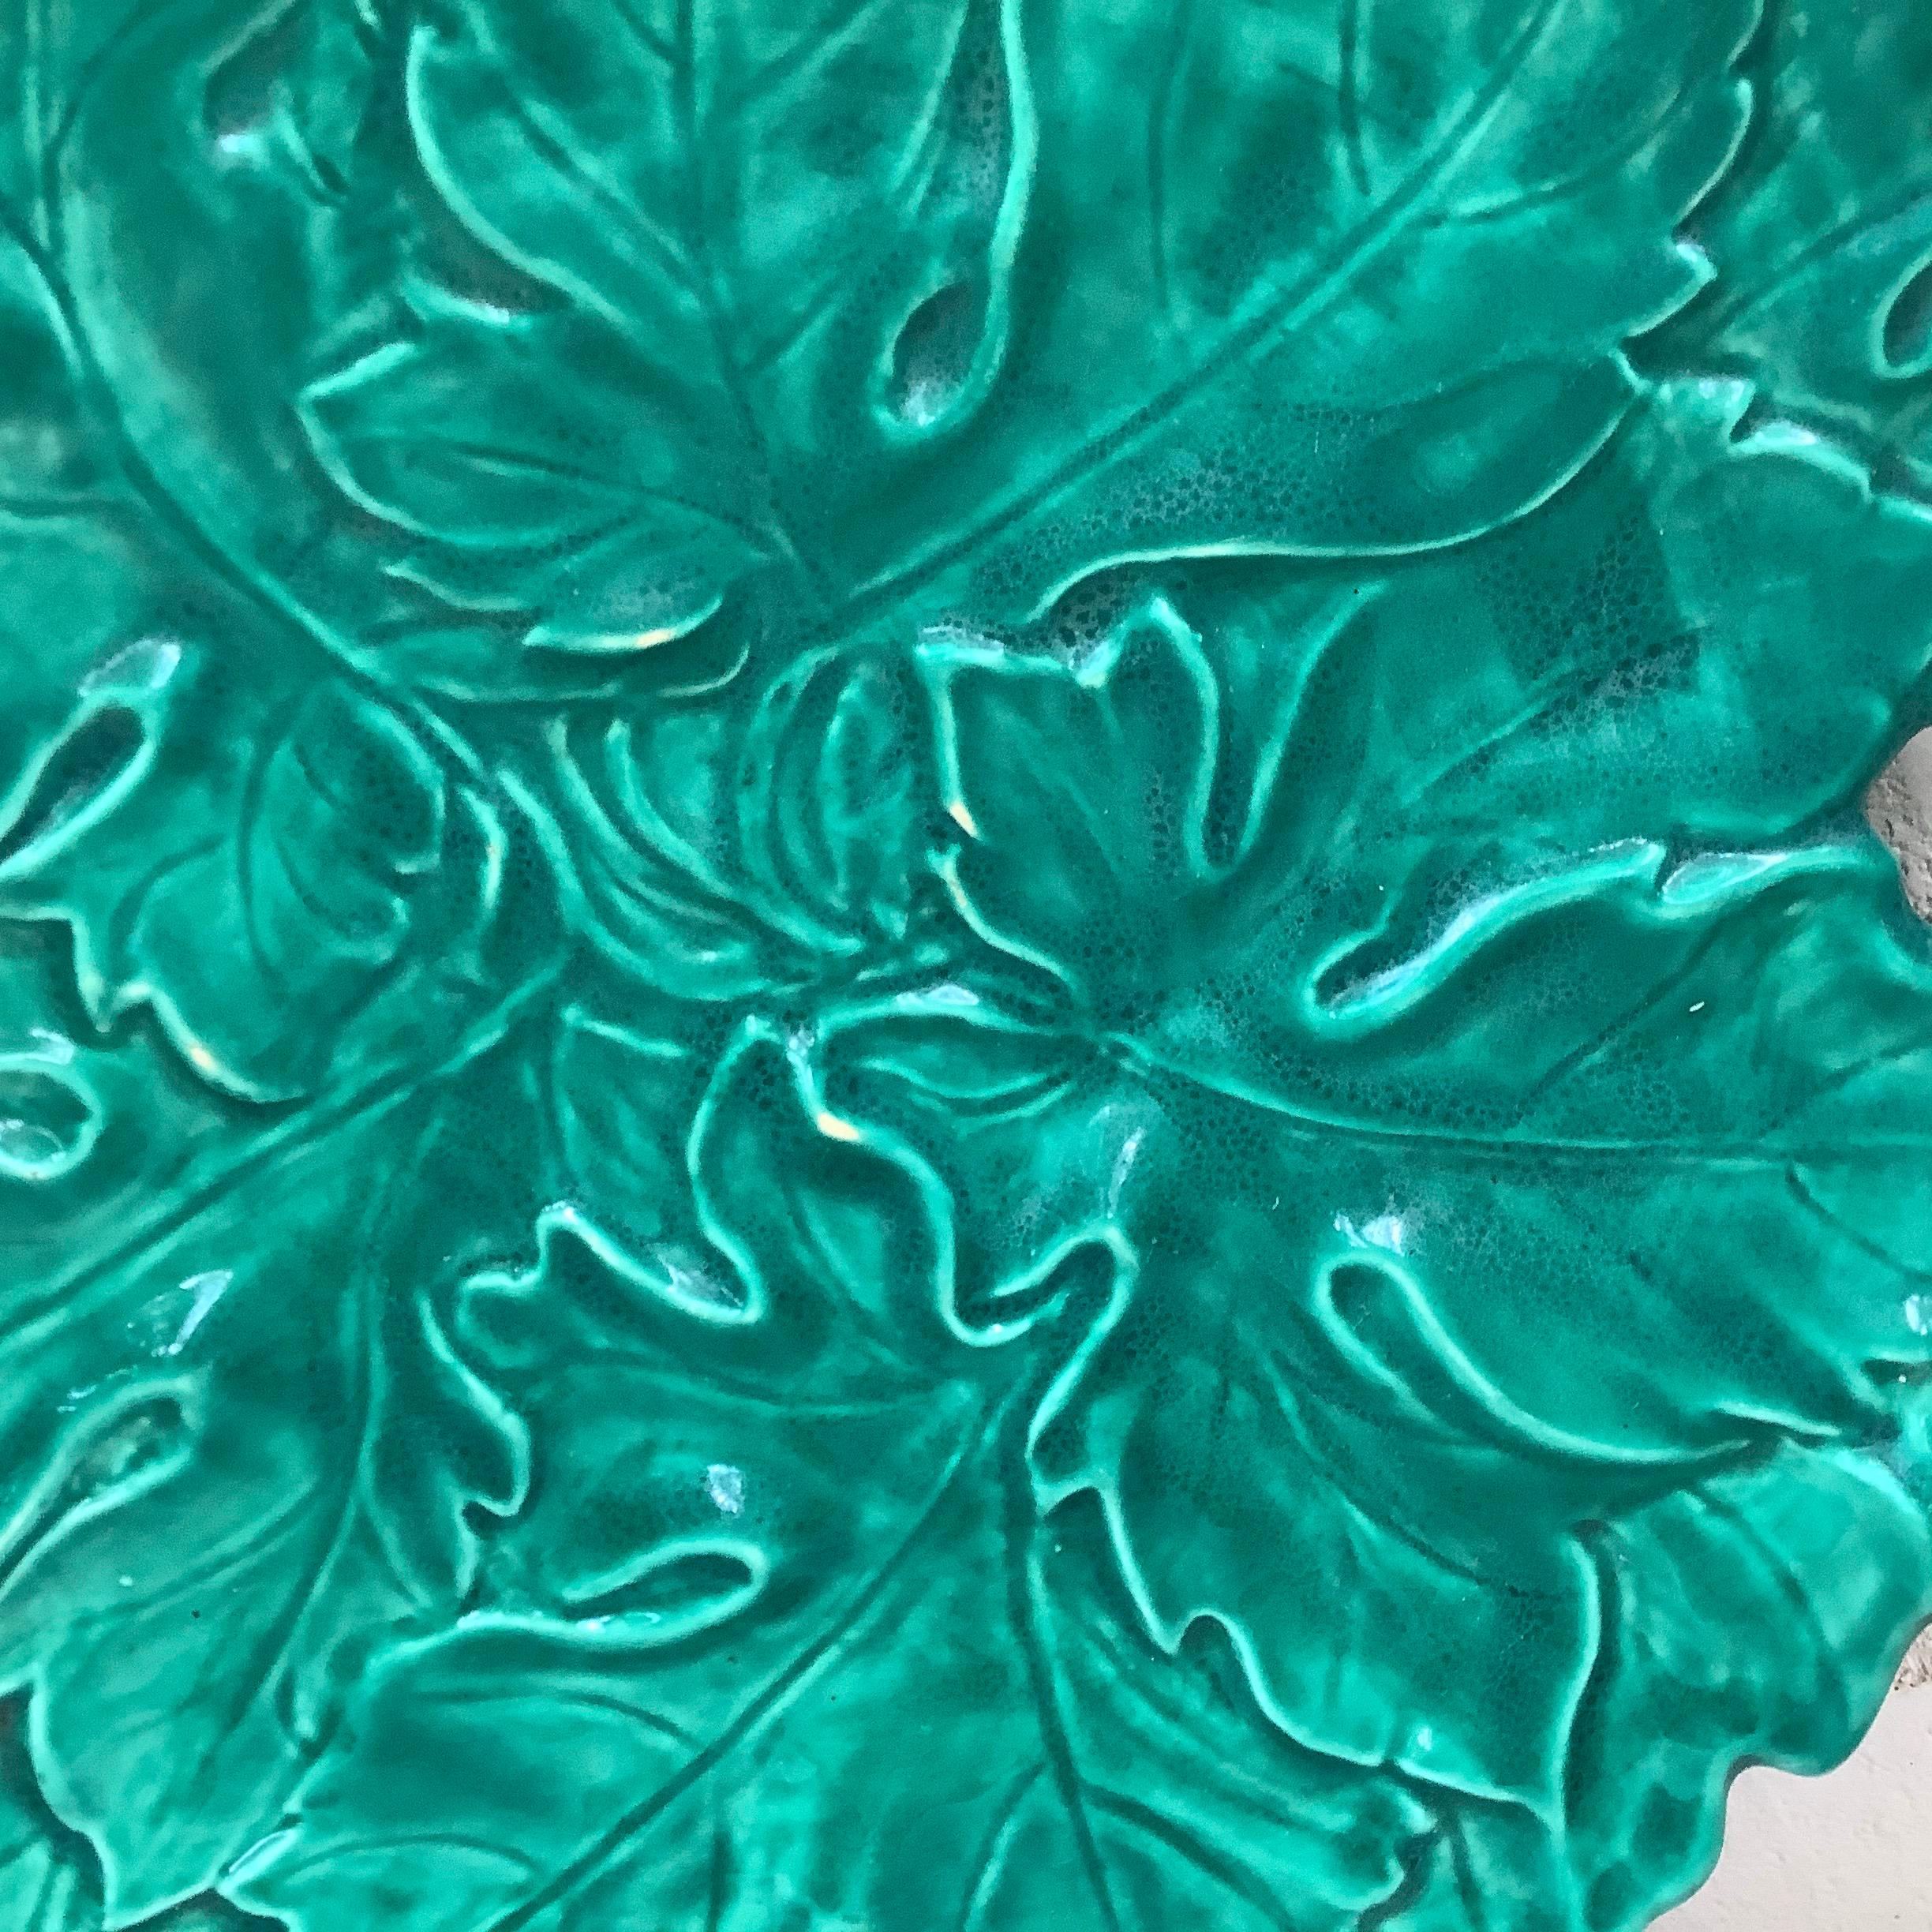 French large green Majolica handled platter with leaves signed Sarreguemines Digoin.